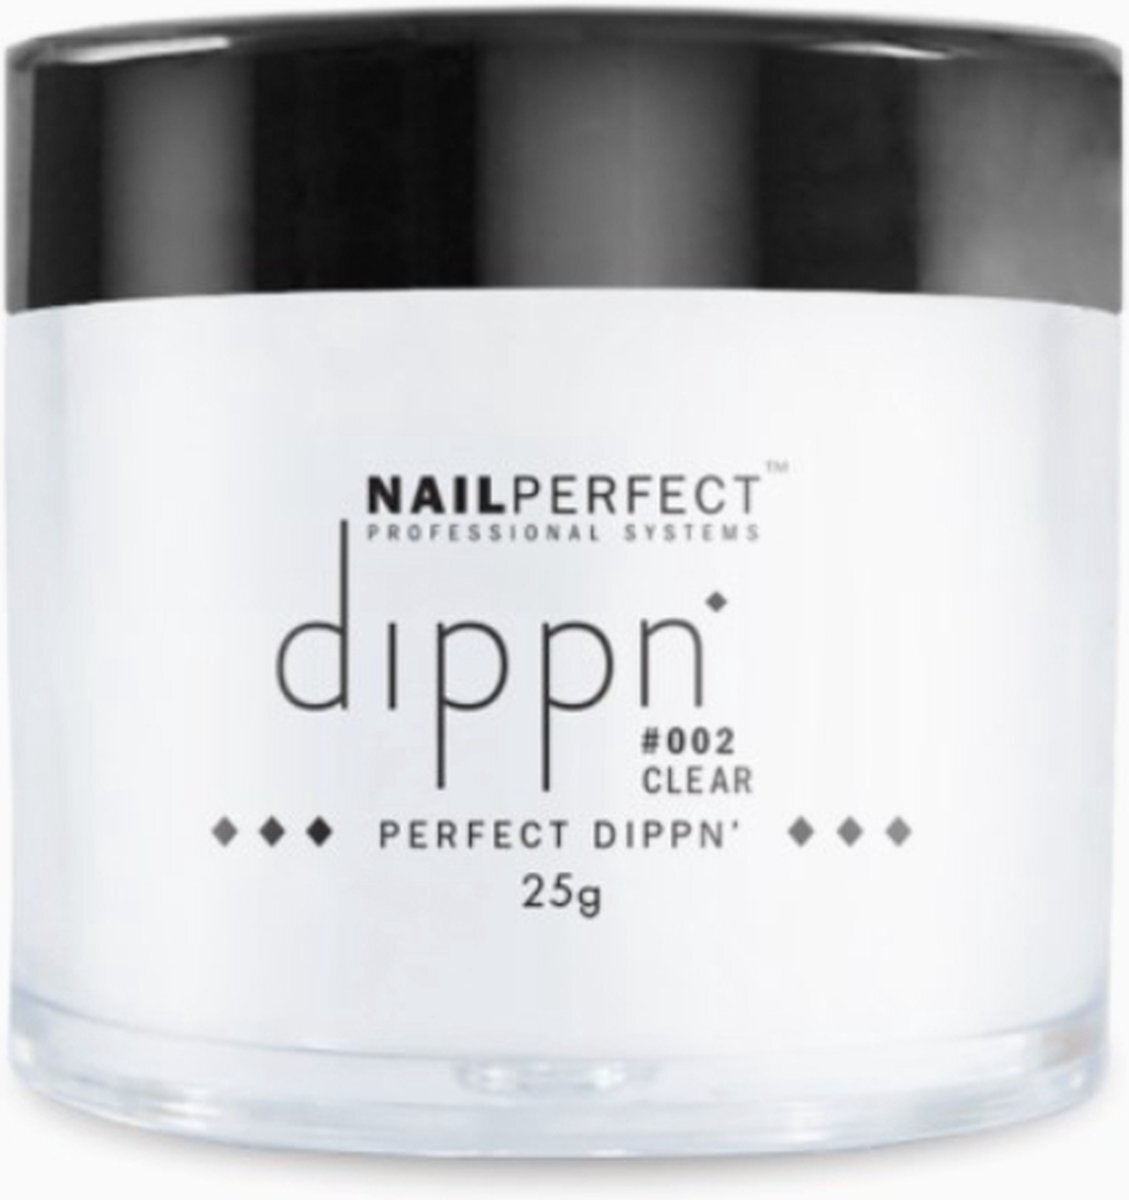 Nailperfect Poeder Acrylic Perfect Dippn' Dippn' Powder #002 Clear